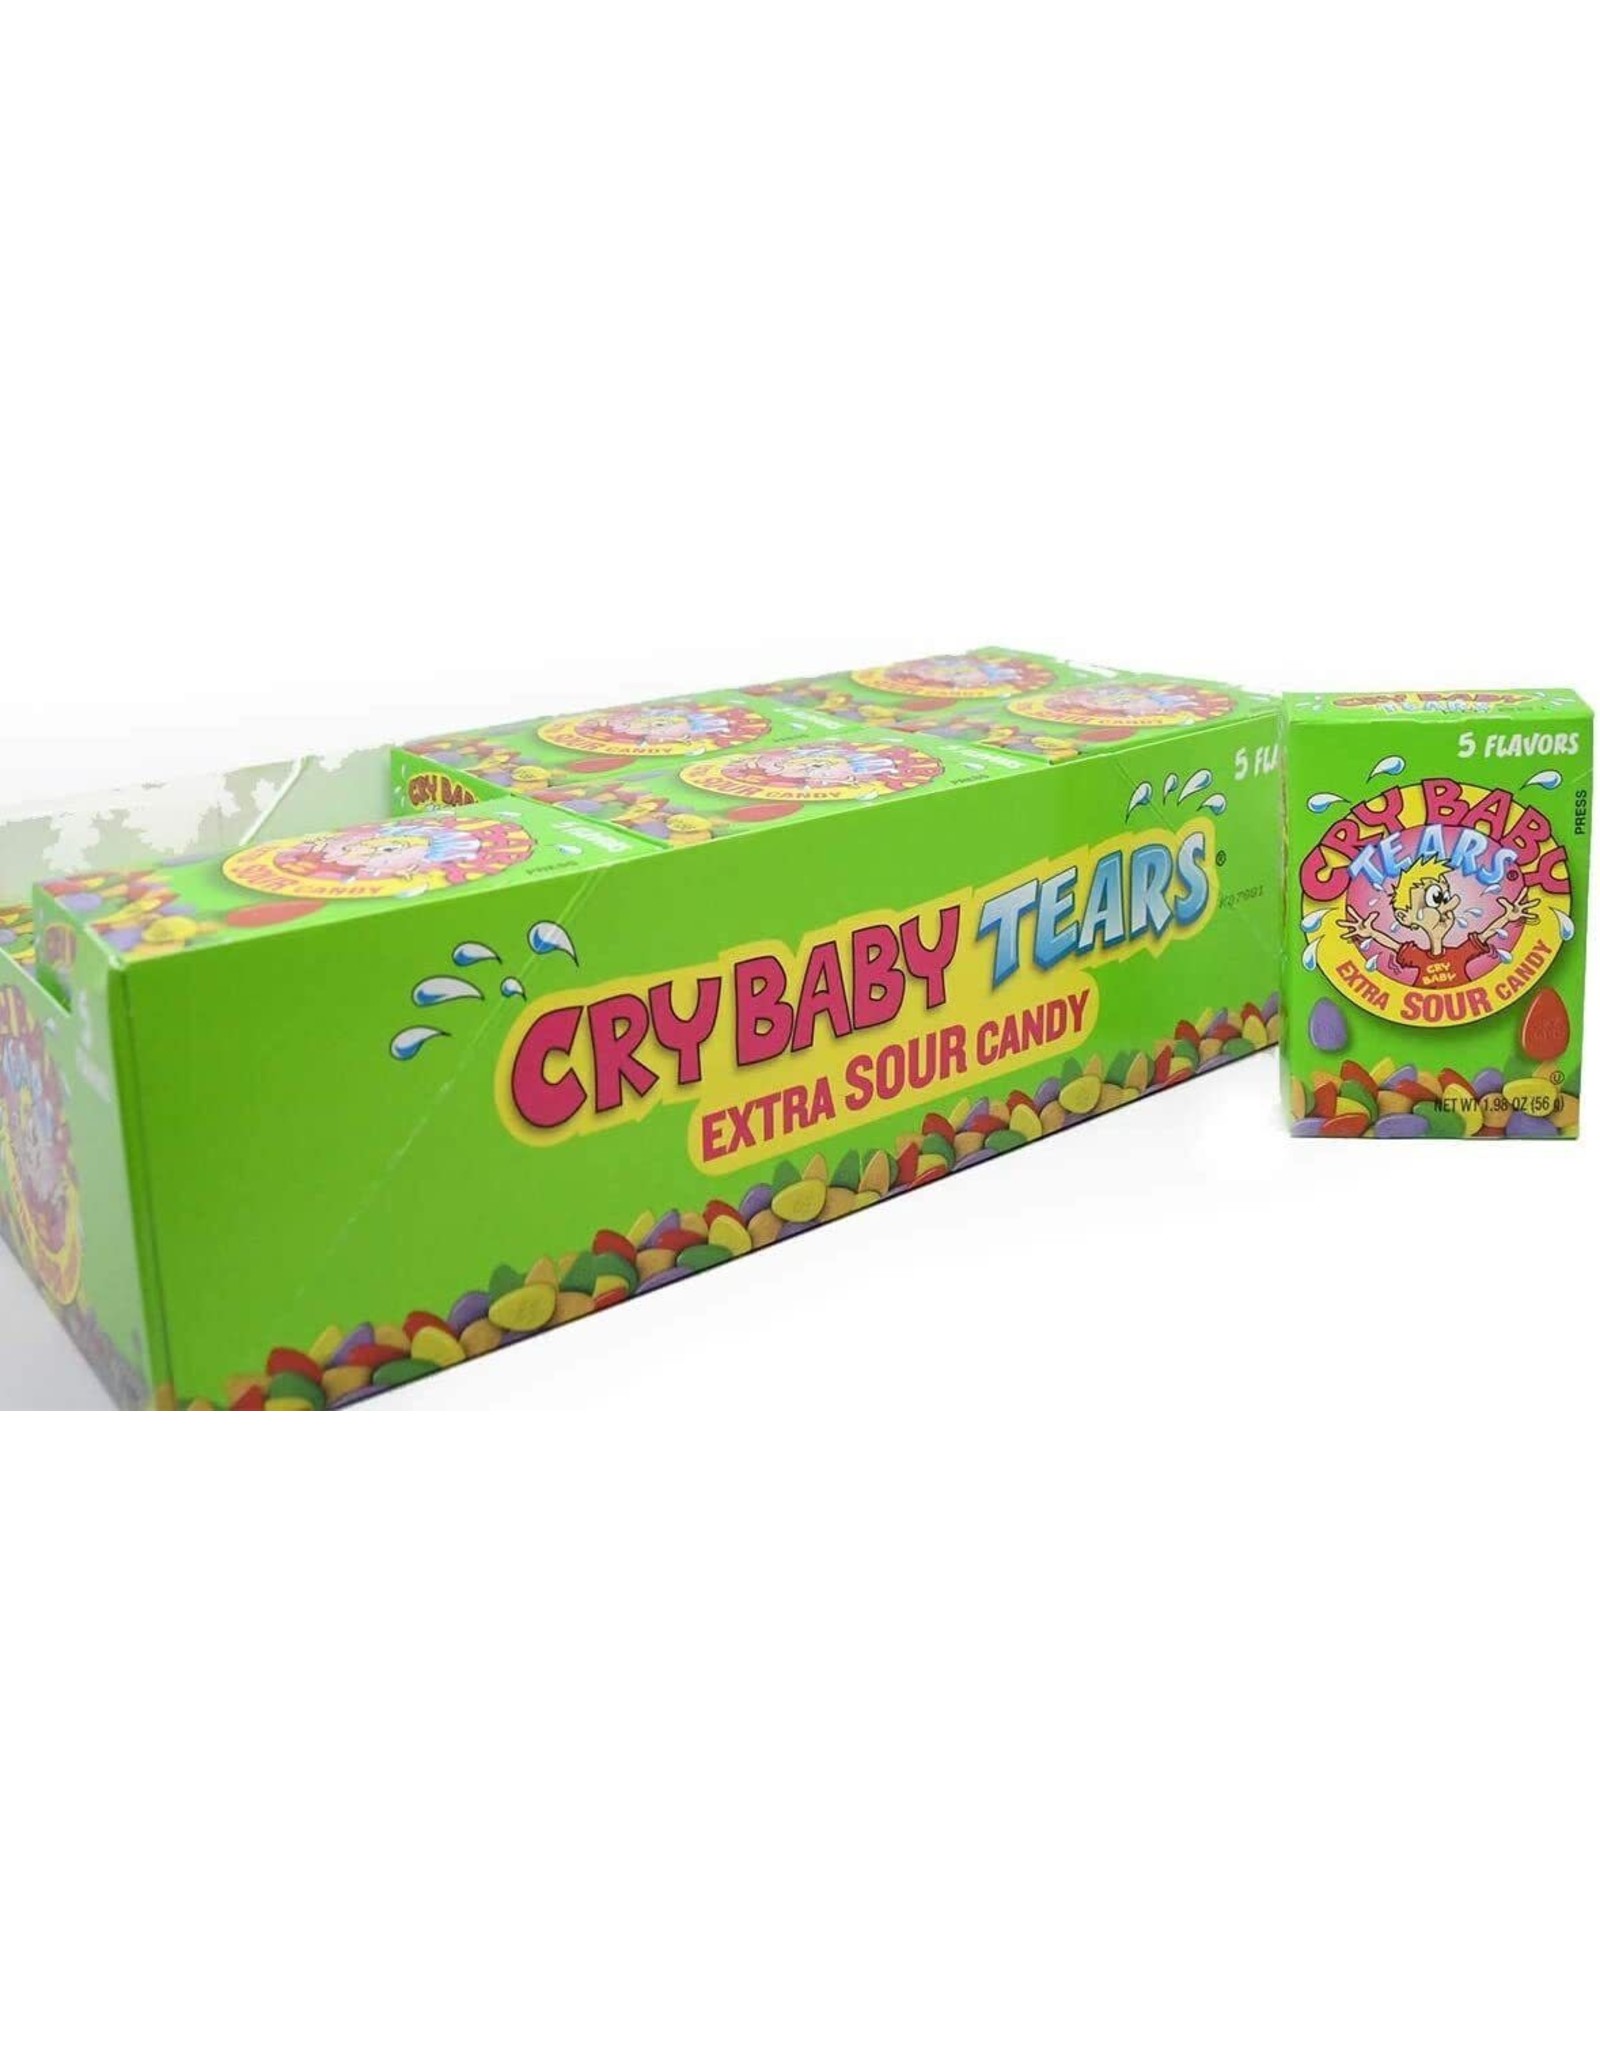 Cry Baby Extra Sour Tears - 5 Flavors - 56g